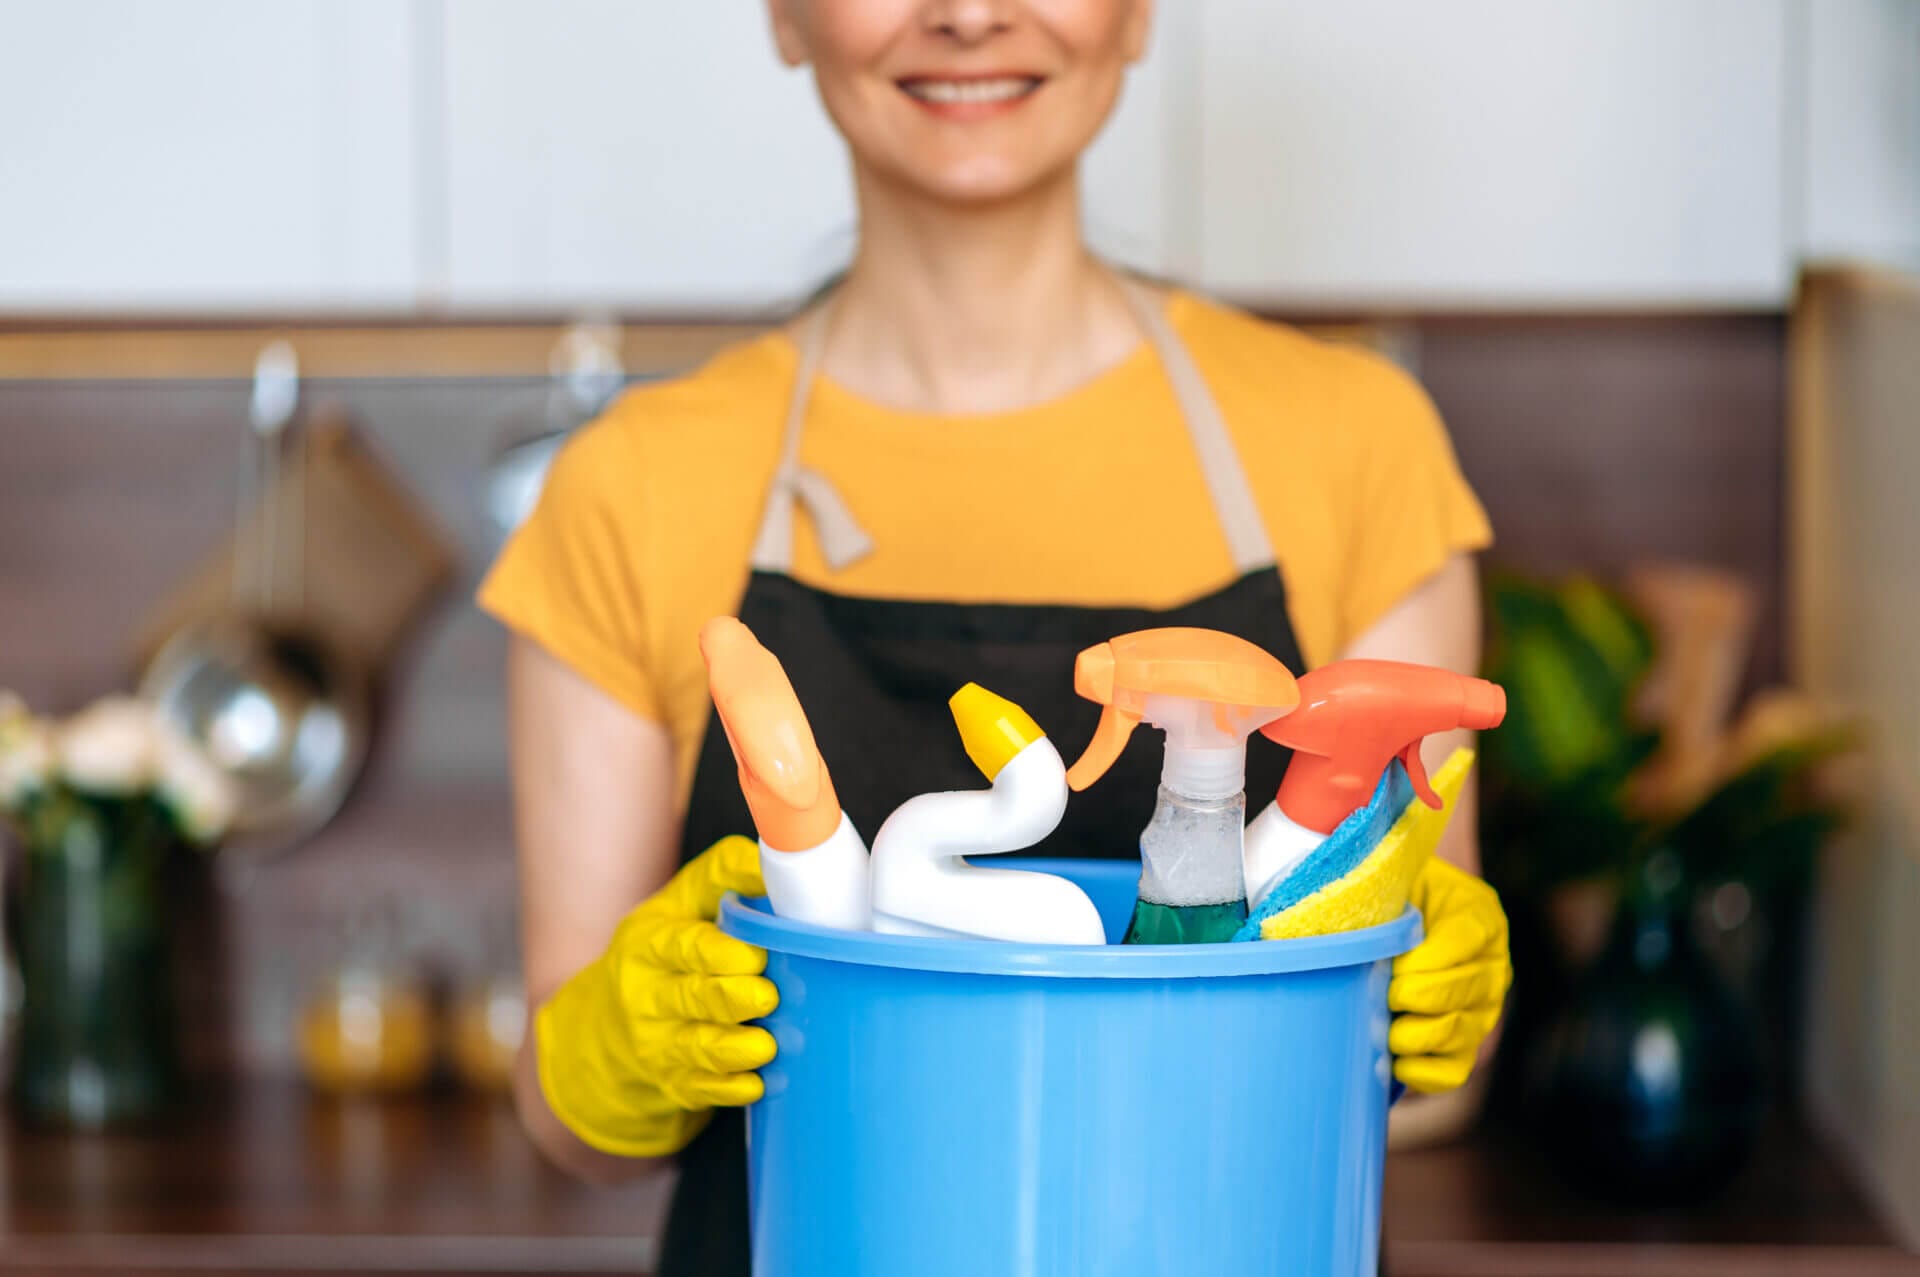 Cleaning service woman with a bucket of products ready to start cleaning showing the benefits of hiring a cleaning service